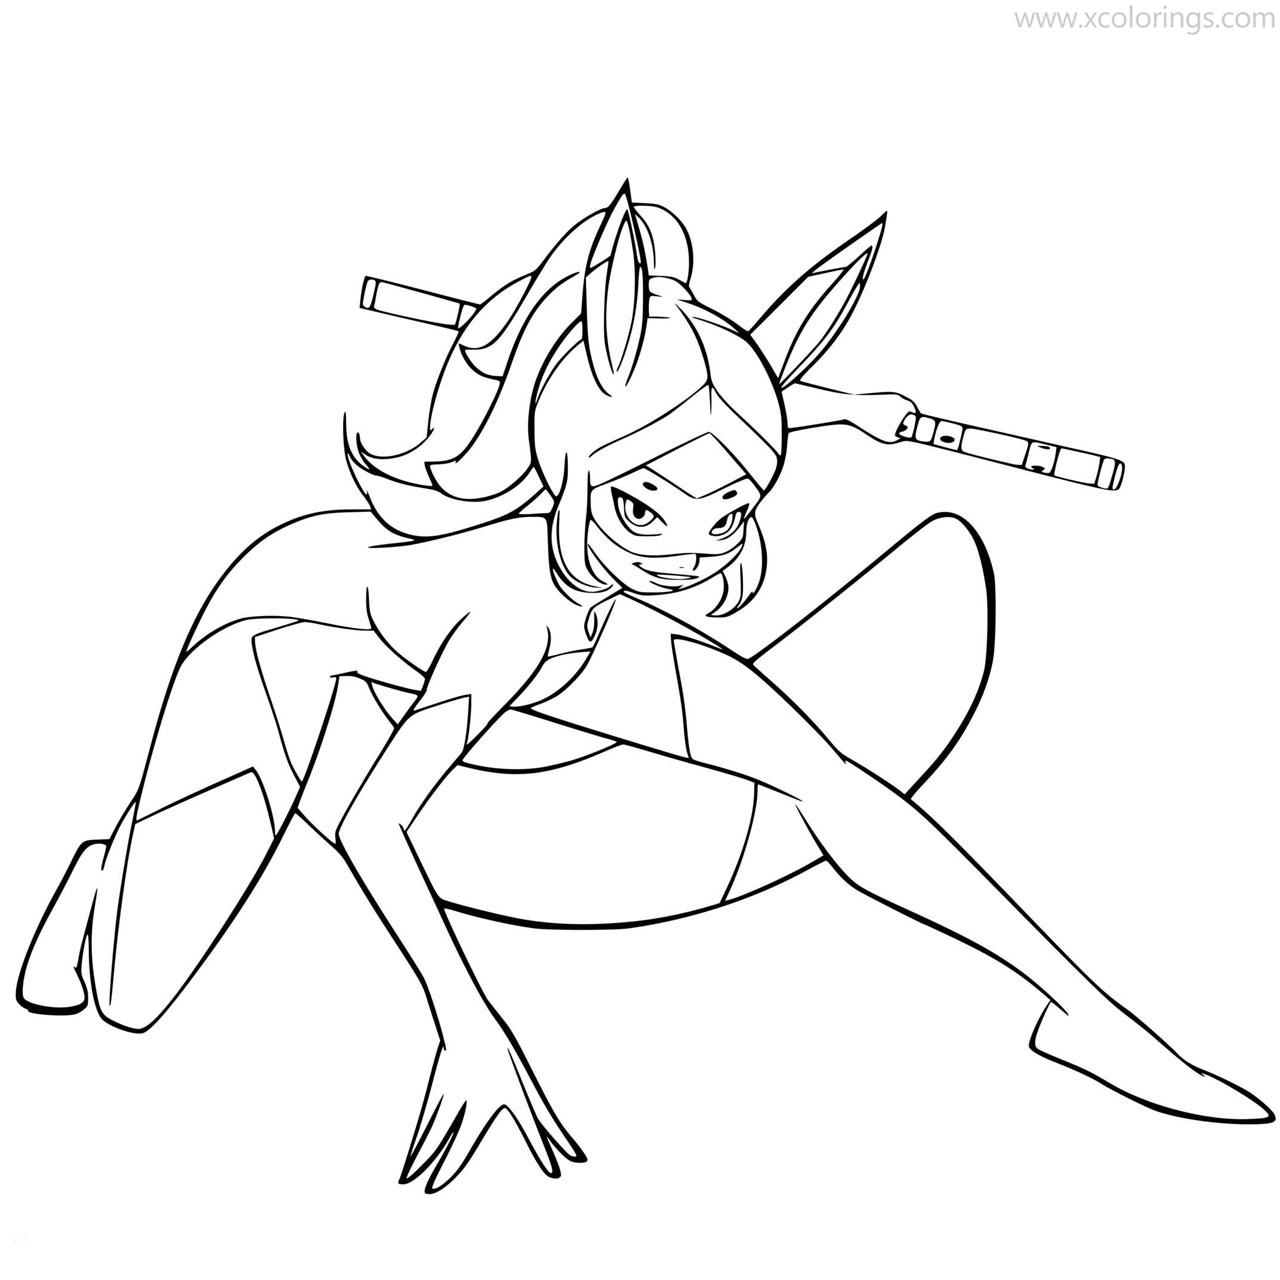 Free Miraculous Ladybug Coloring Pages Rena Rouges printable